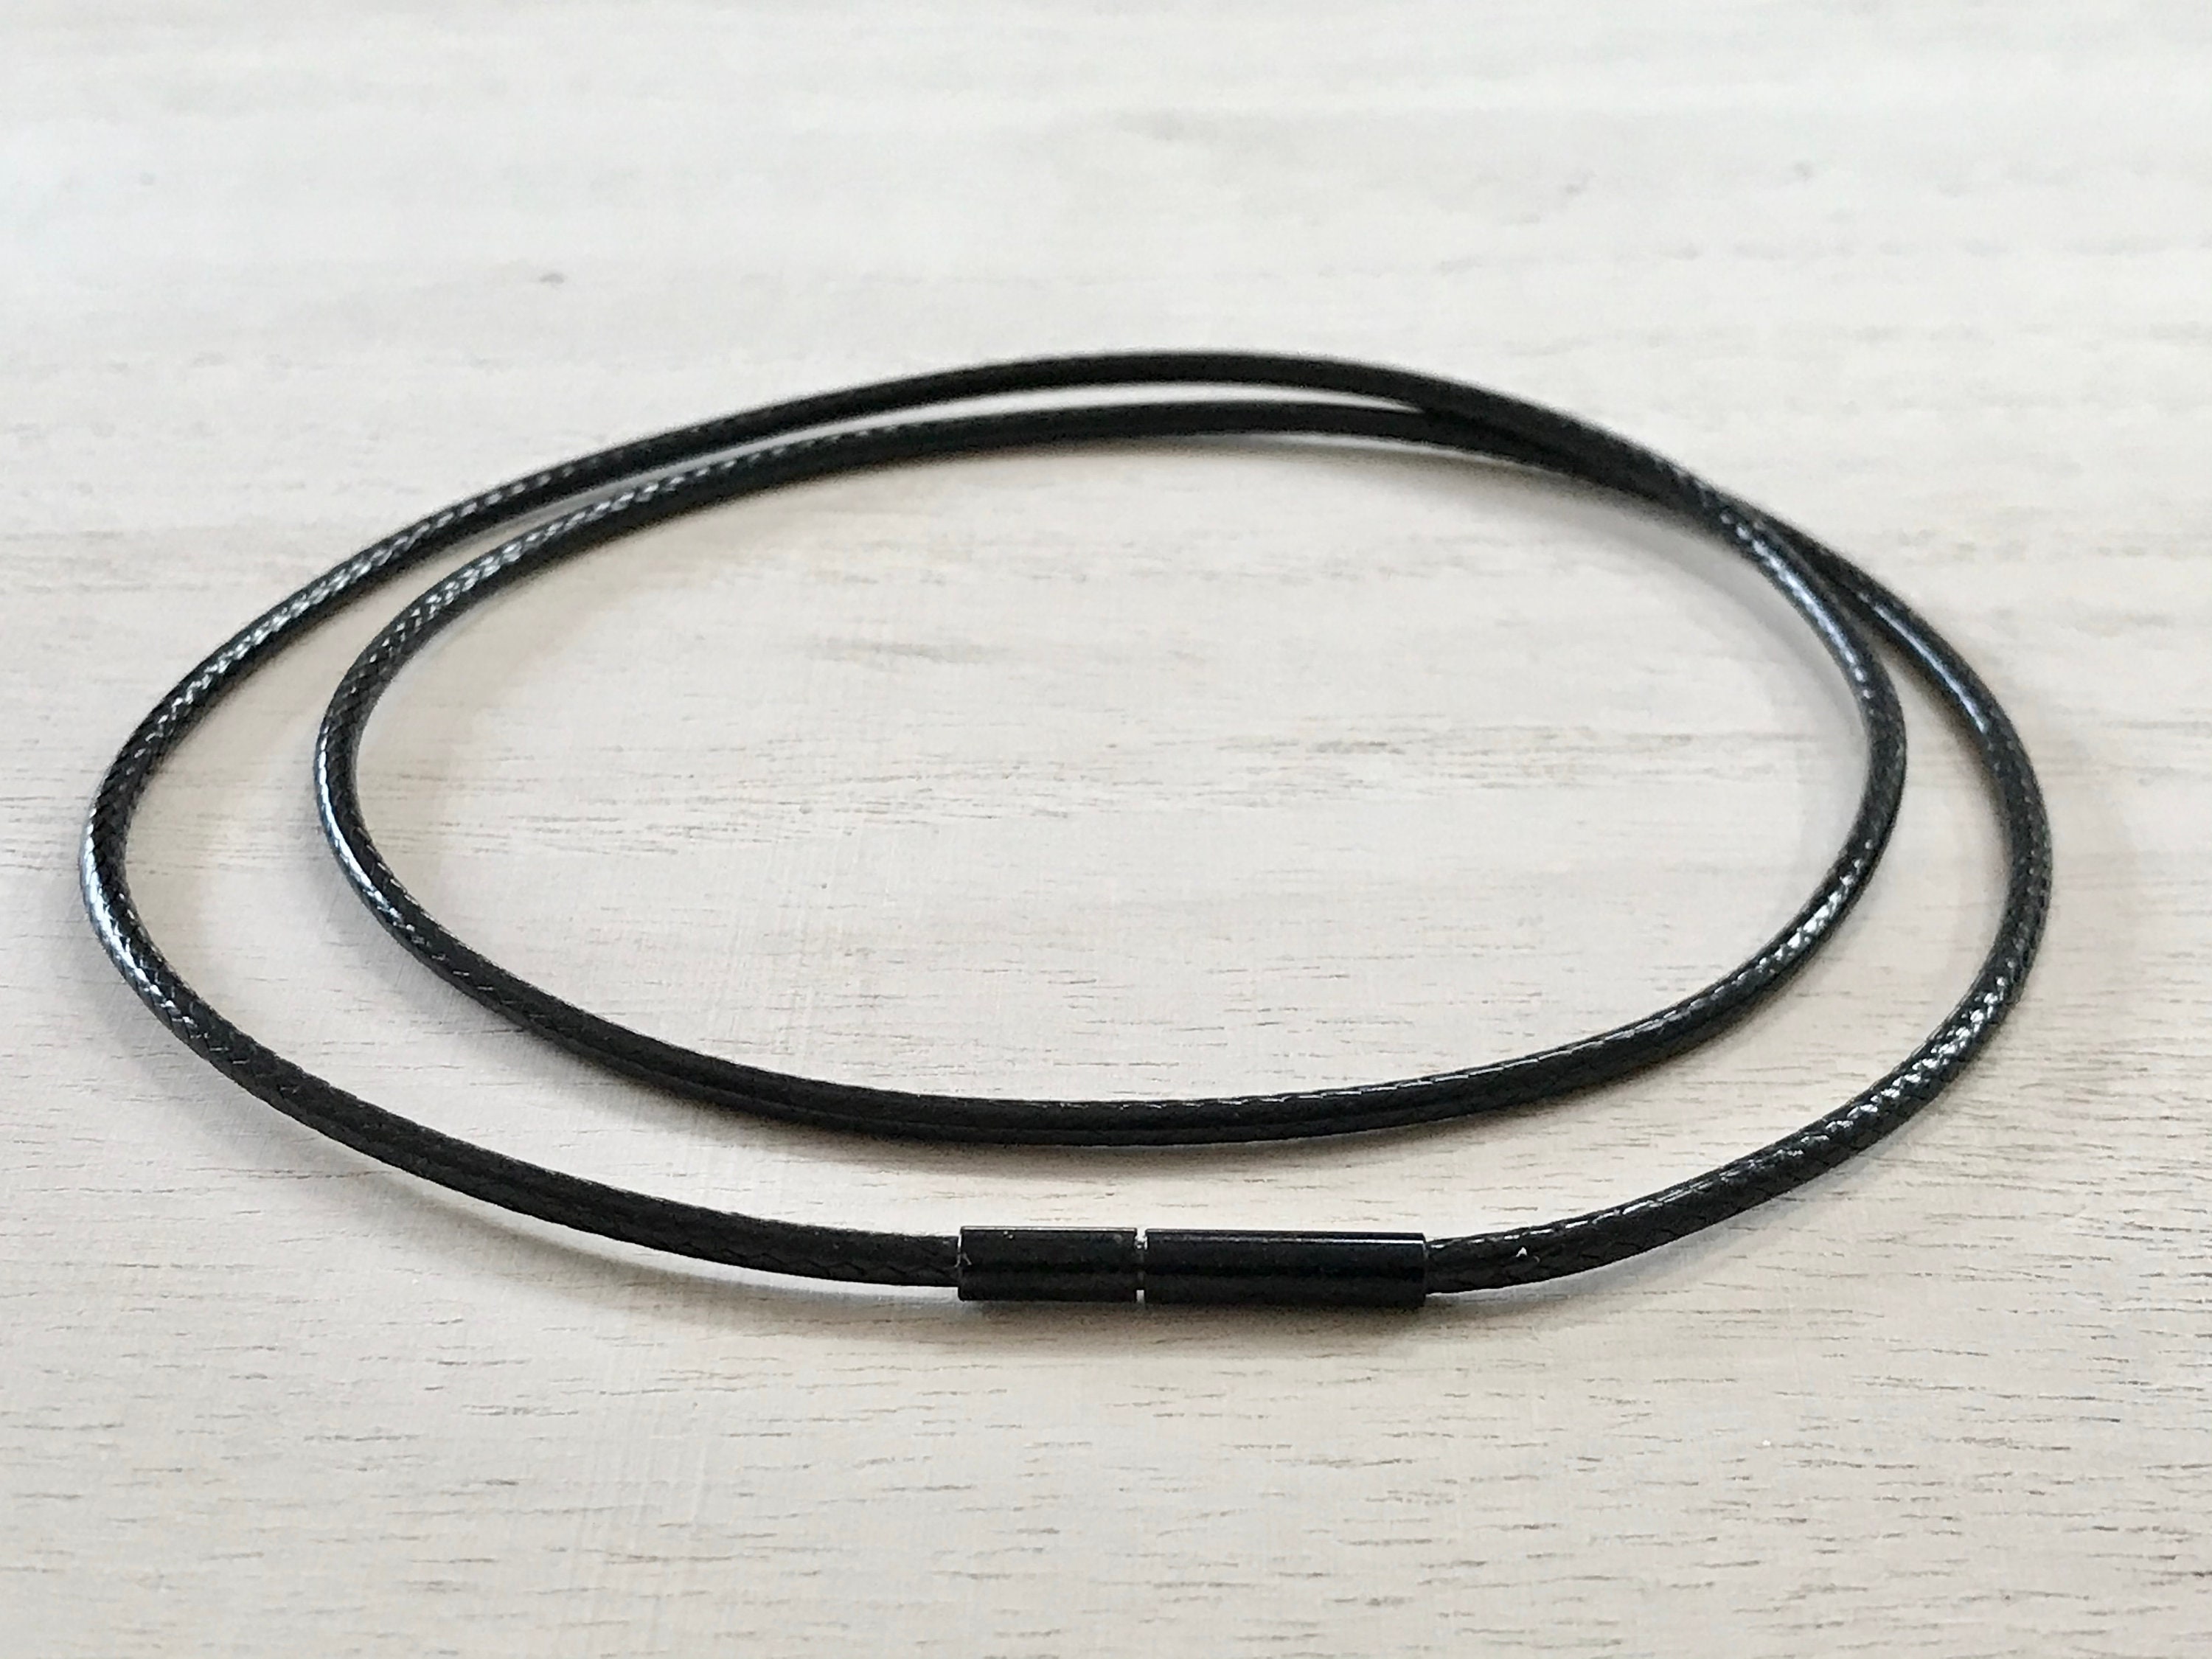 100 Pack Of 2.0mm Black Leather Necklace Cord With Lobster Clasp